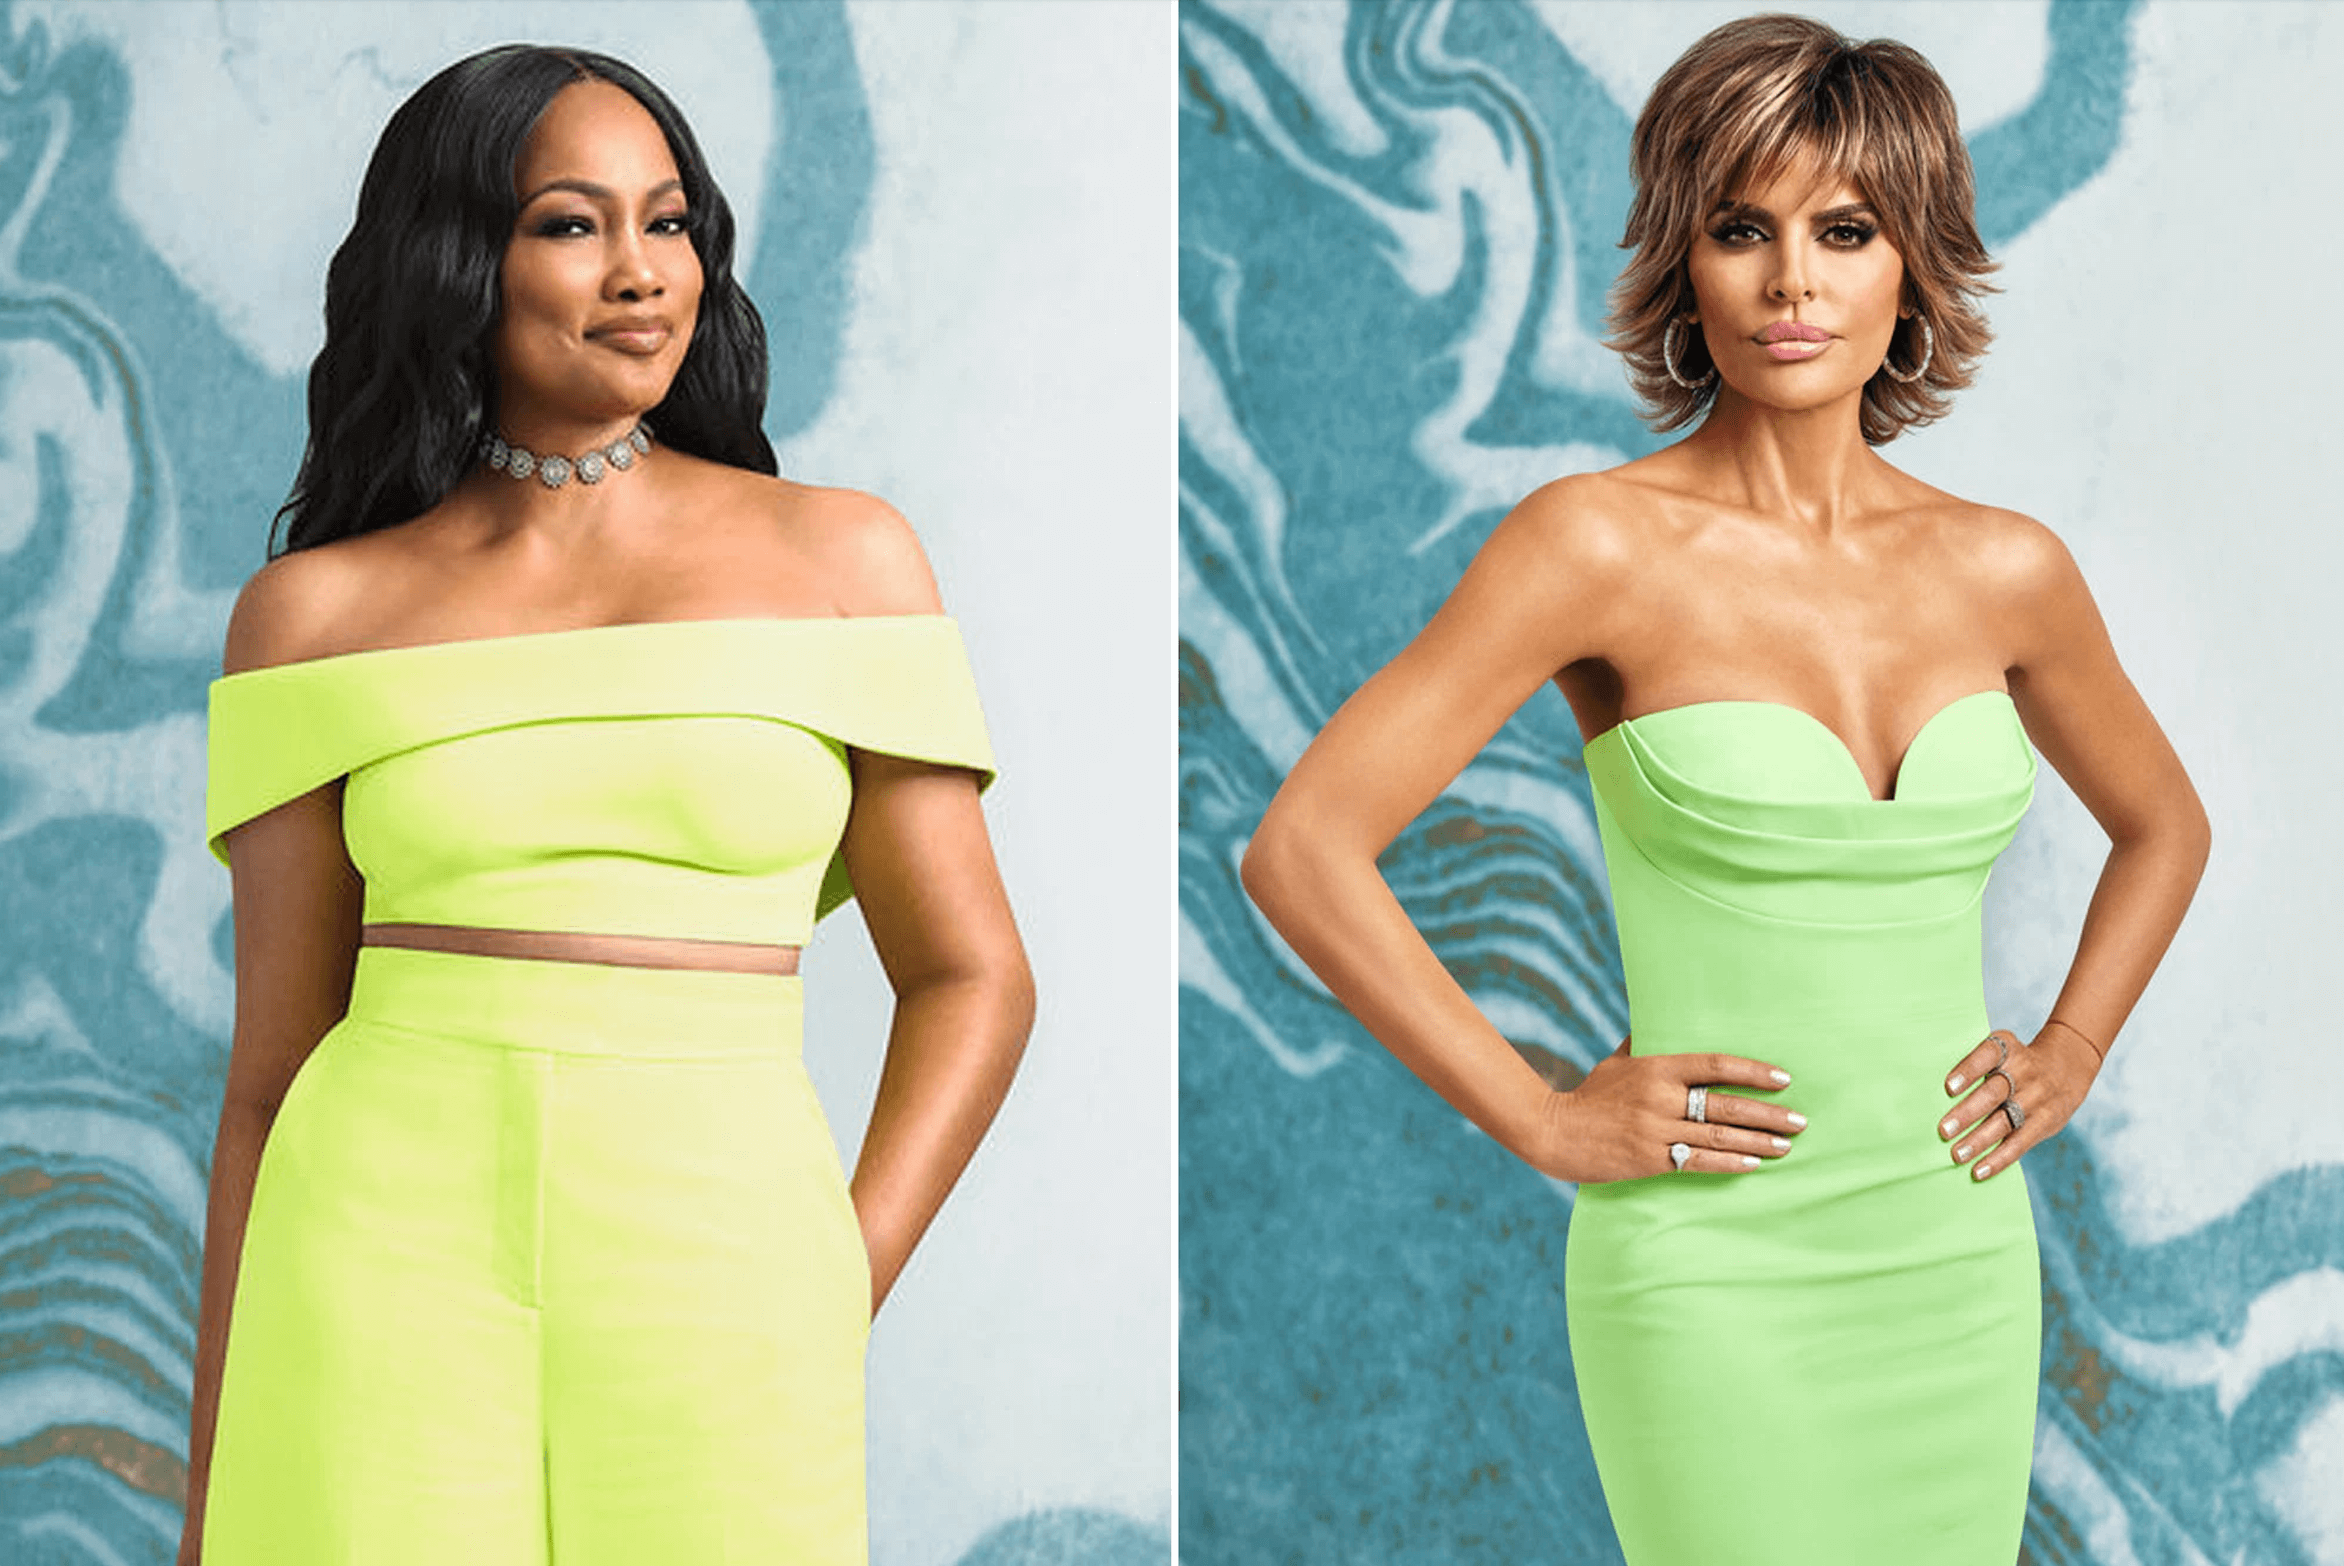 Garcelle Beauvais SLAMS Lisa Rinna, Calling Her The ‘Most Conniving’ ‘RHOBH’ Cast Member!